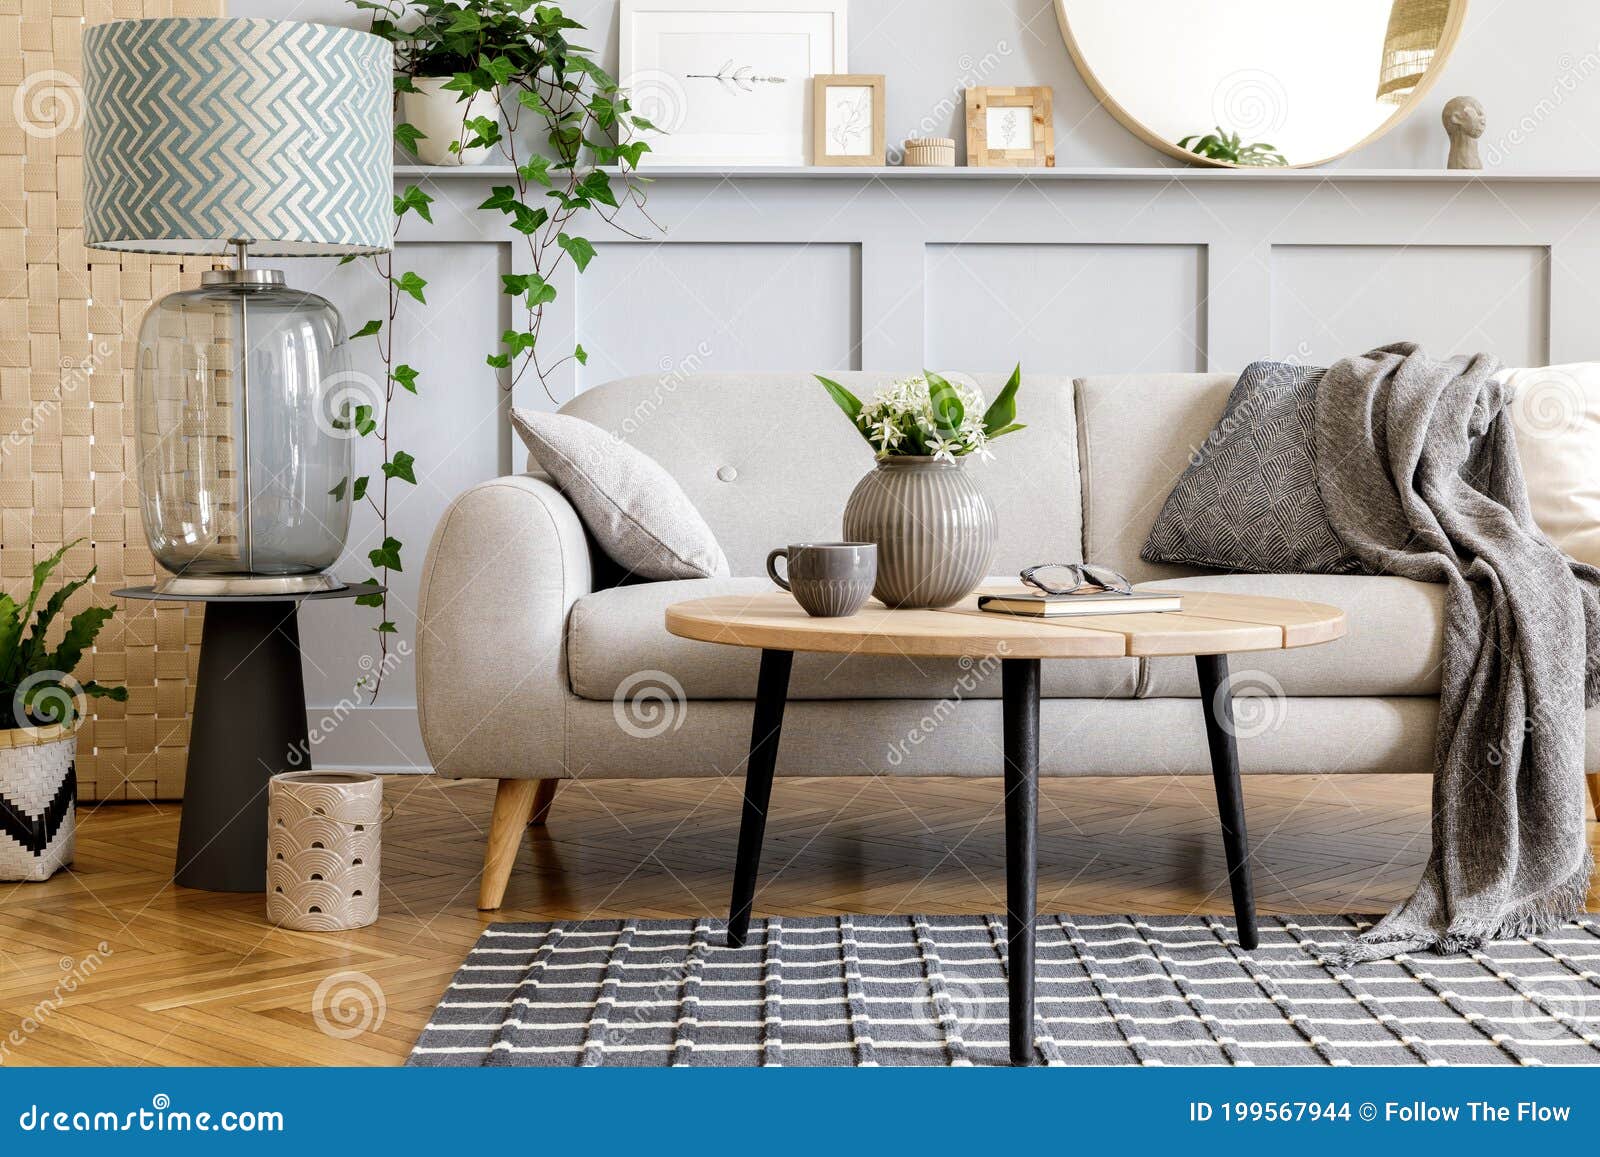 scandinavian concept of living room interior with  sofa, coffee table, plant in pot, lamp, carpet, plaid, pillow, shelf.